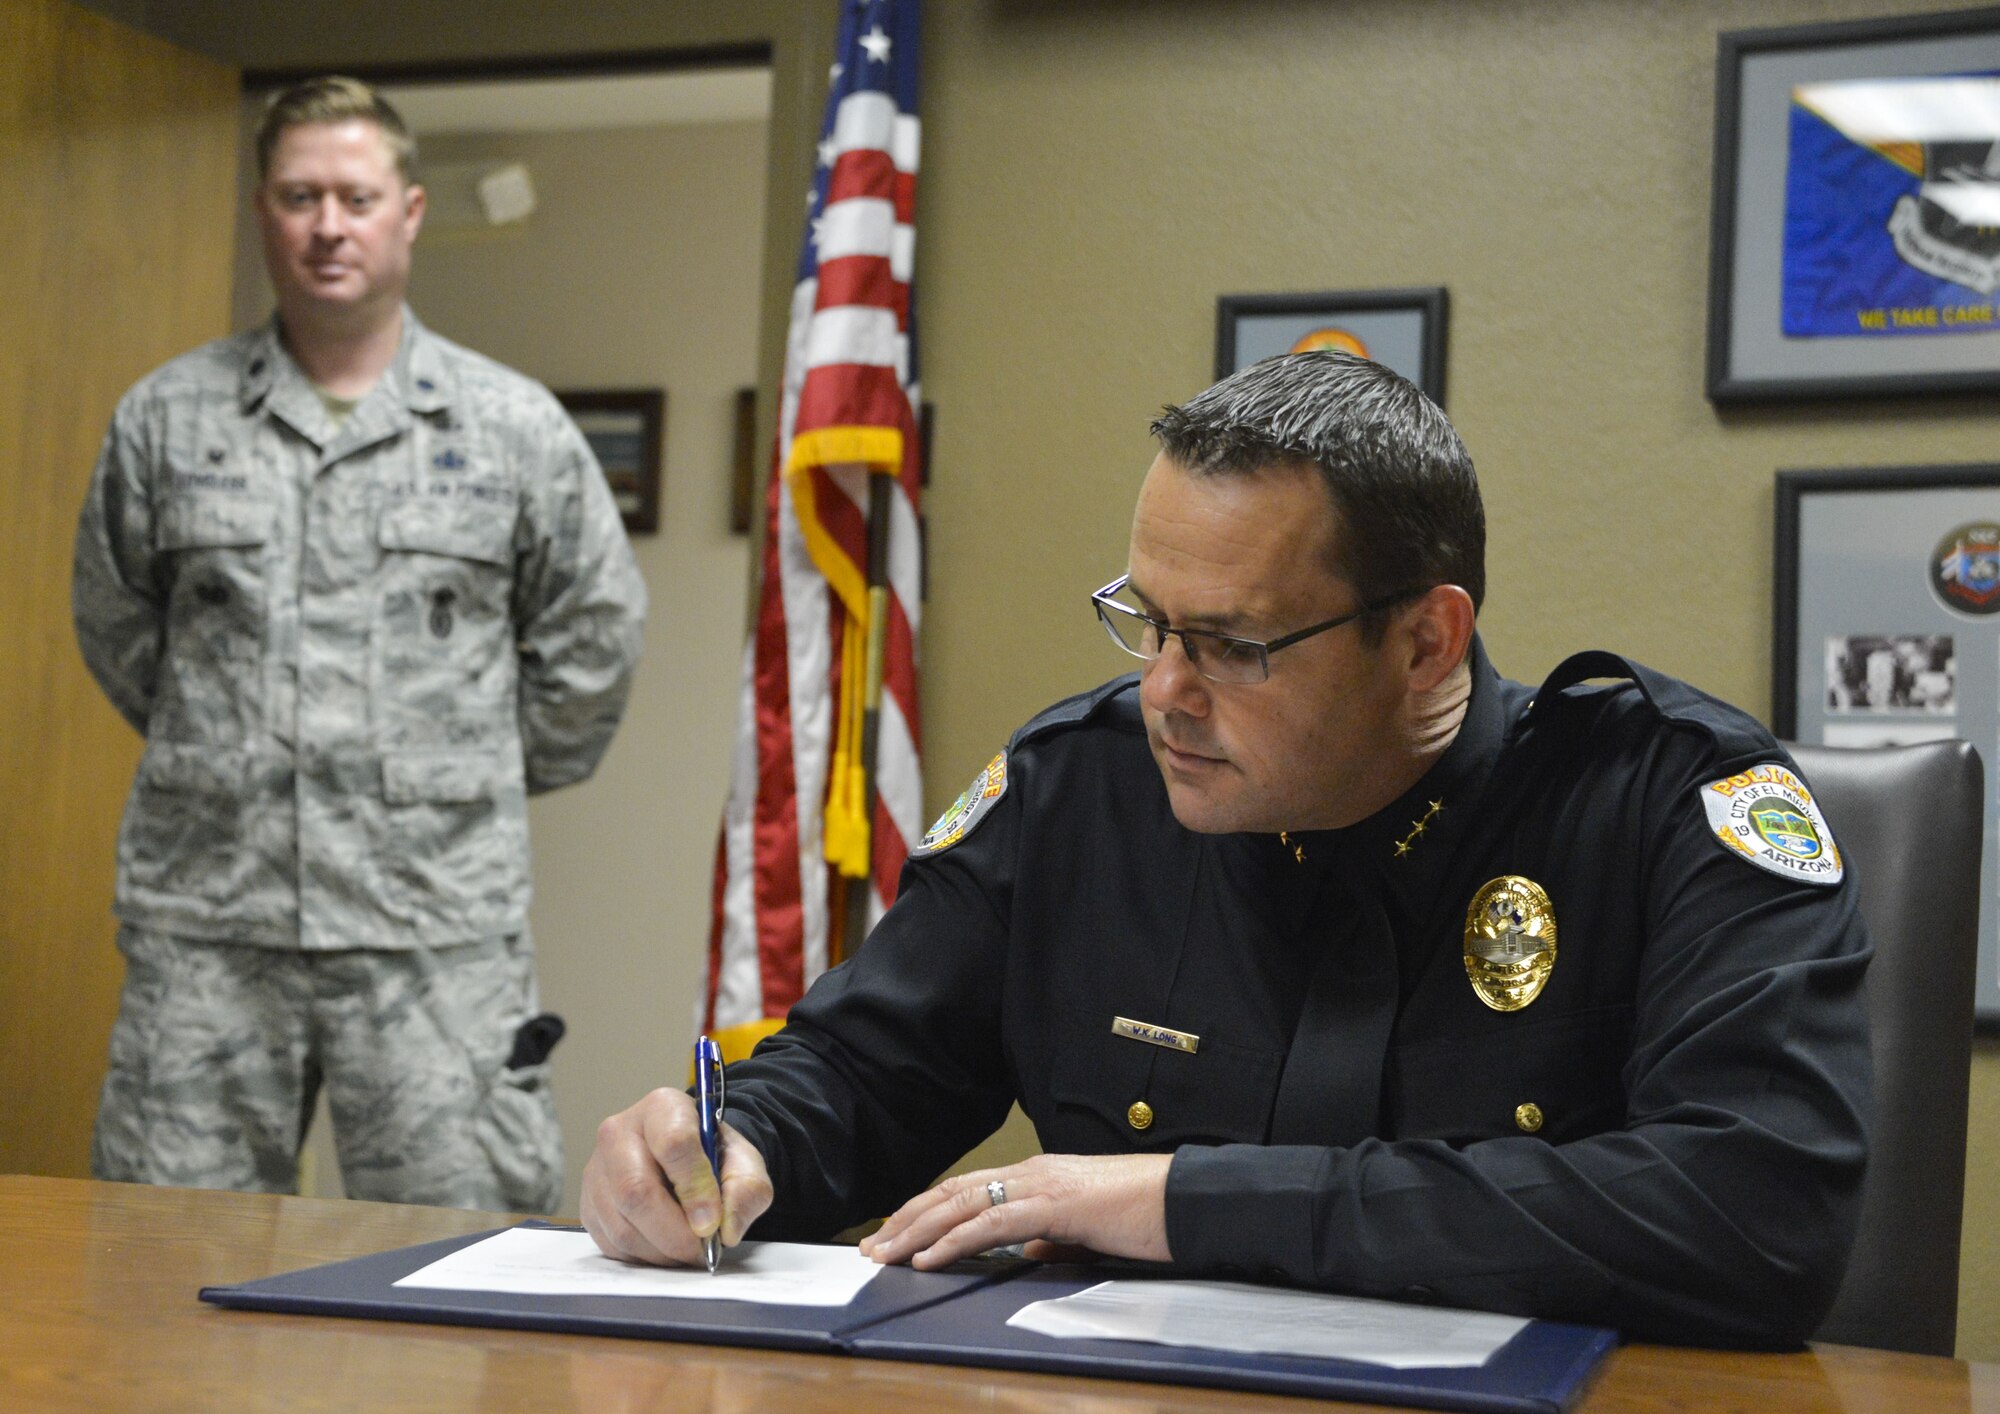 Bill Long, El Mirage Police Department interim police chief, signs the Emergency Vehicle Operators Course Memorandum of Understanding at Luke Air Force Base, Ariz., Jan. 10, 2018. The MSG and 56th Security Forces Squadron will provide the required space for participants to maneuver their vehicles through various obstacles as part of high speed pursuit, avoidance and other forms of EVOC training. (U.S. Air Force photo/Airman 1st Class Caleb Worpel)